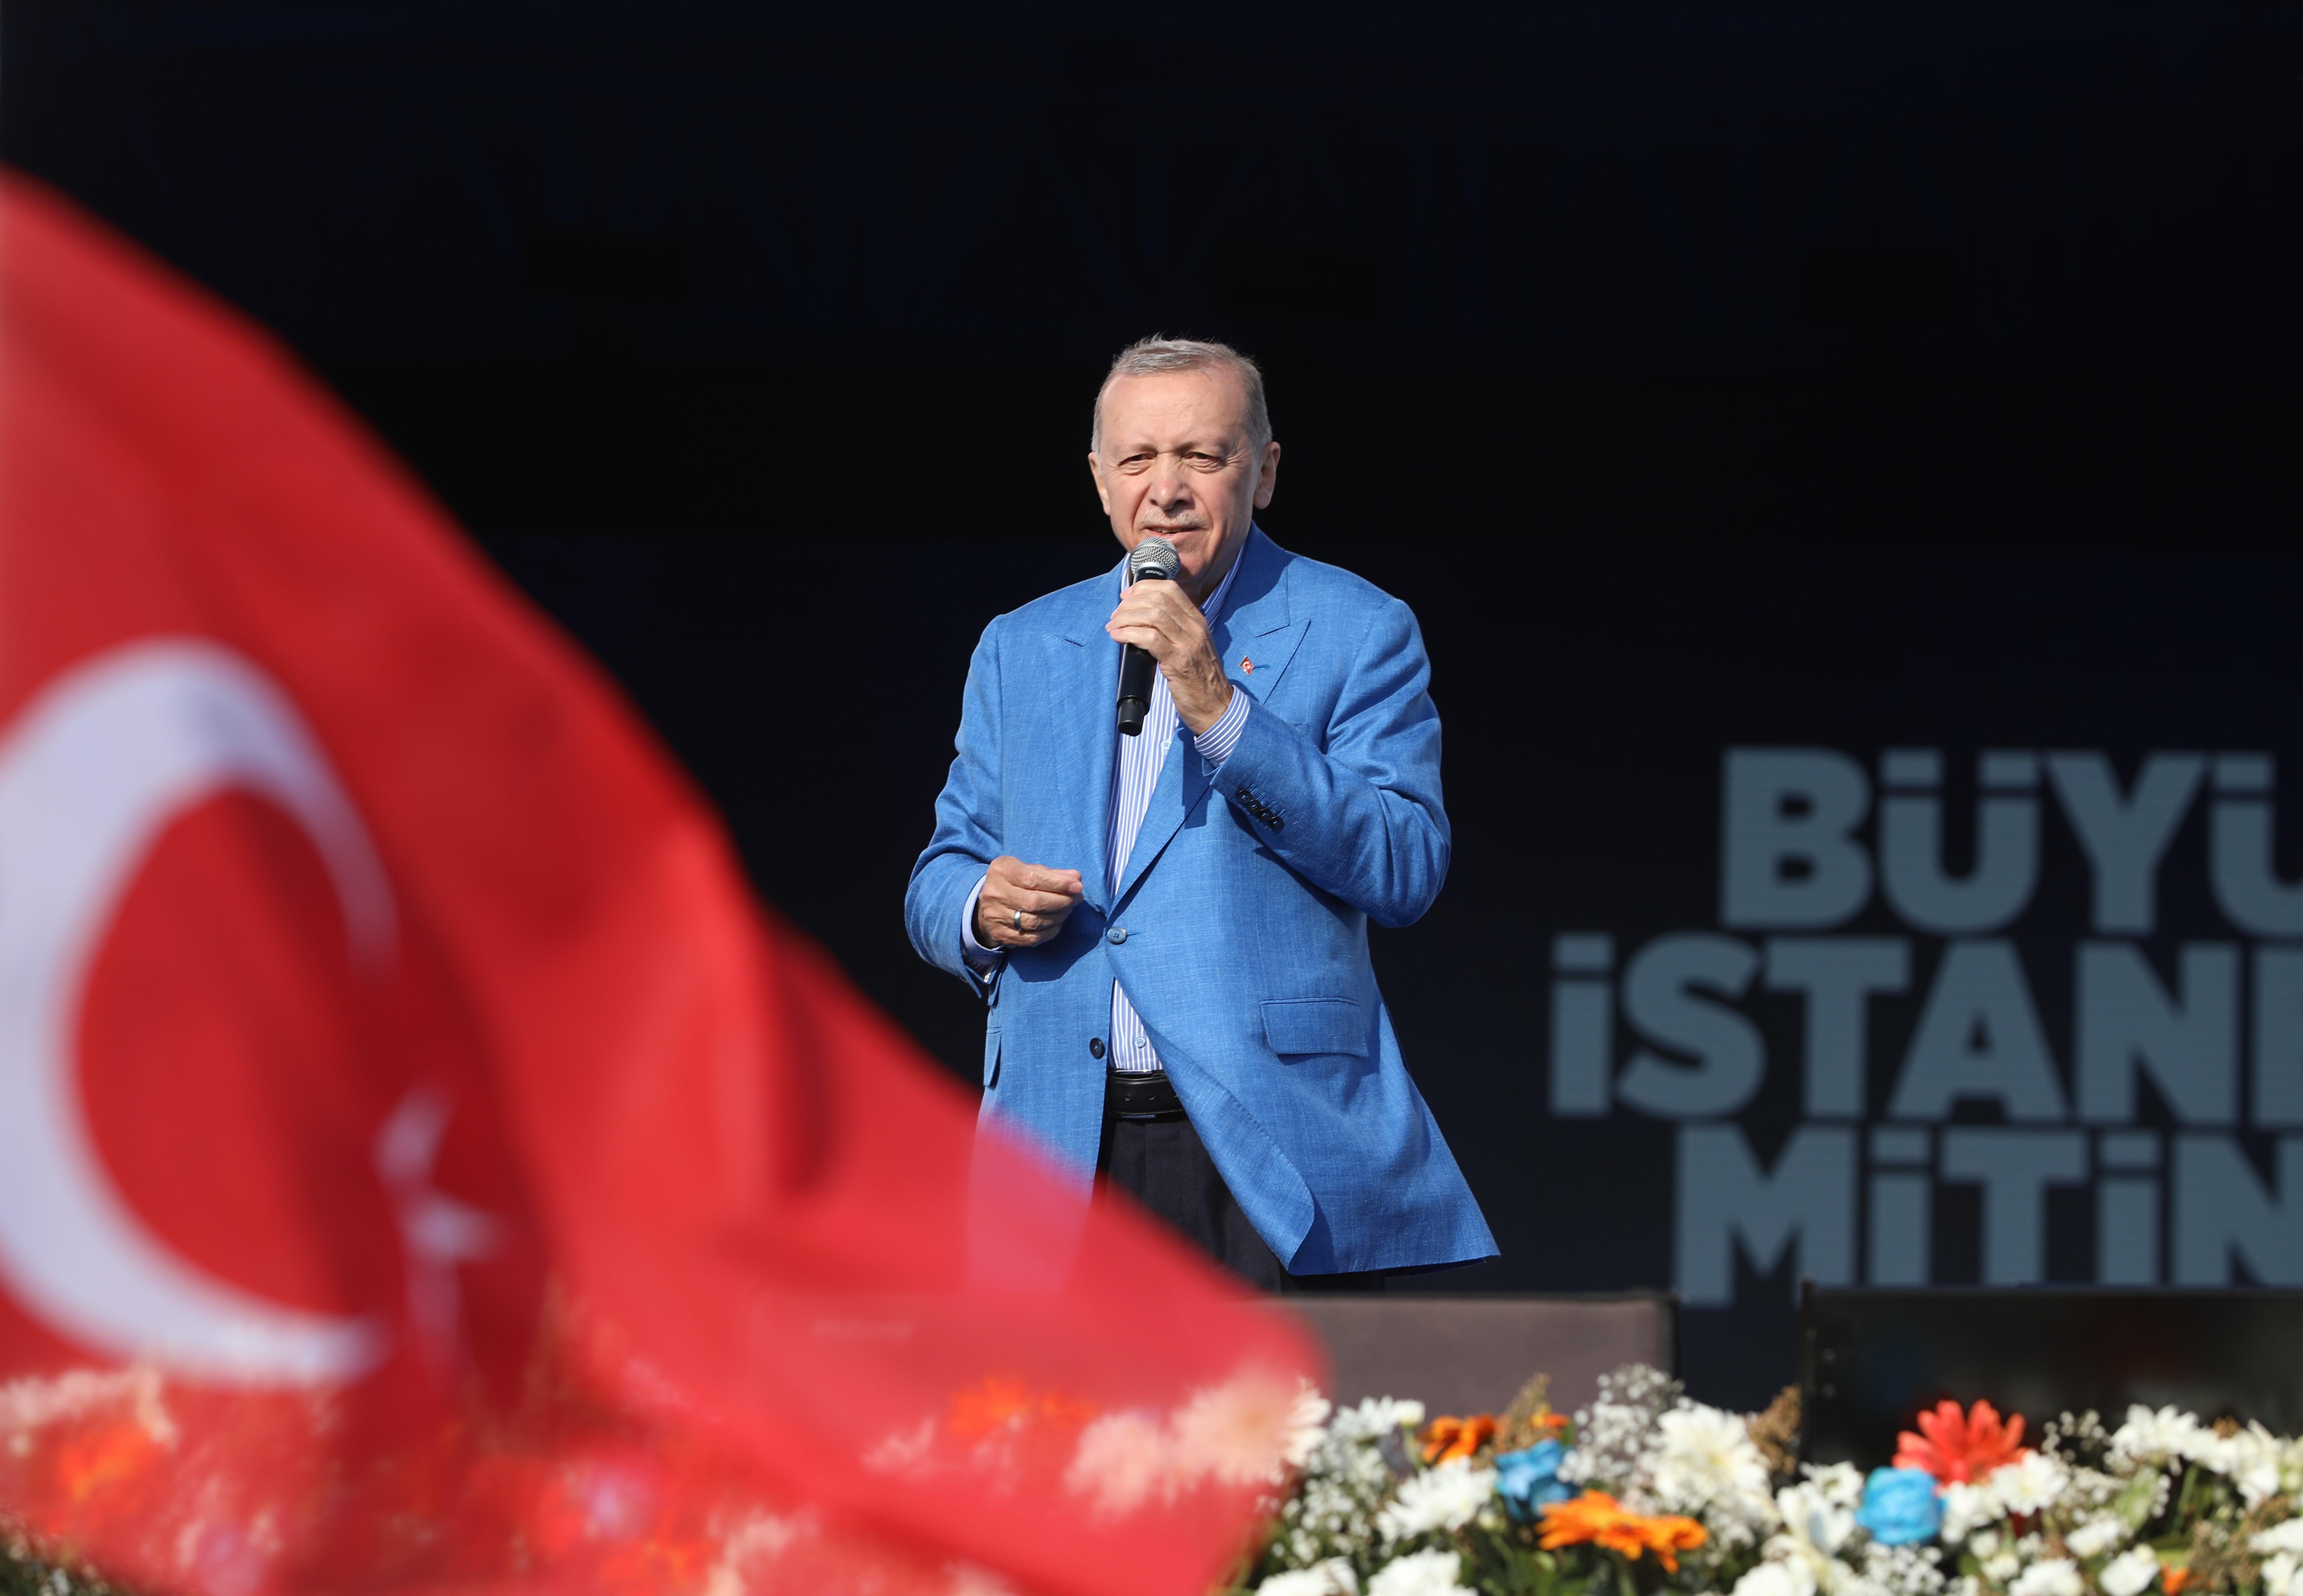 Turkish President Recep Tayyip Erdogan addresses supporters at a rally in Istanbul 